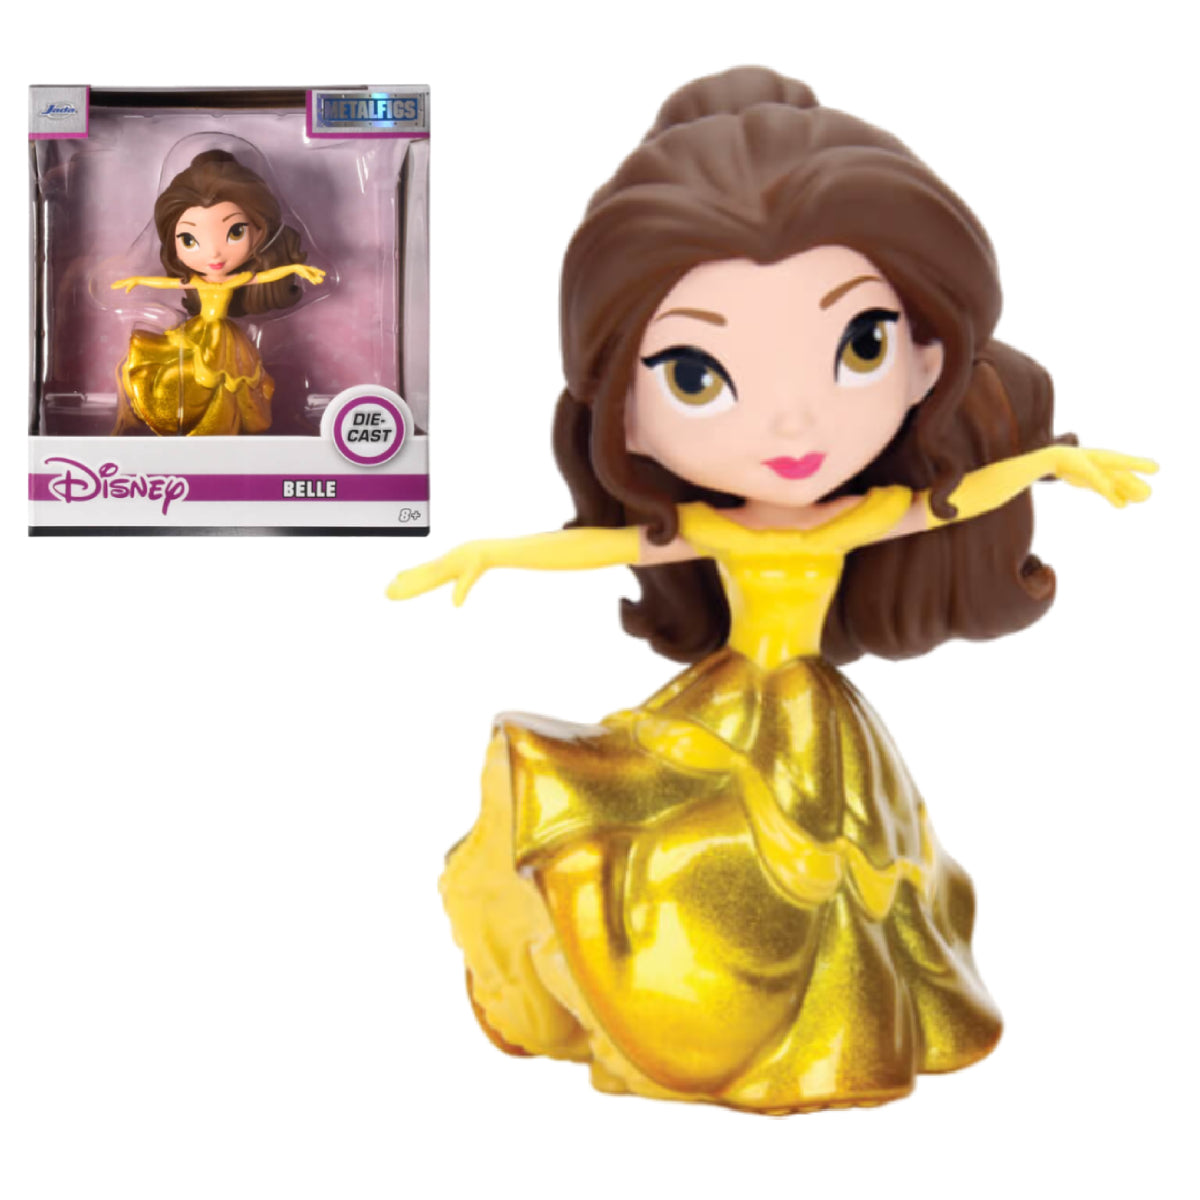 JADA METALFIGS DISNEY BEAUTY AND THE BEAST BELLE IN GOLD GOWN